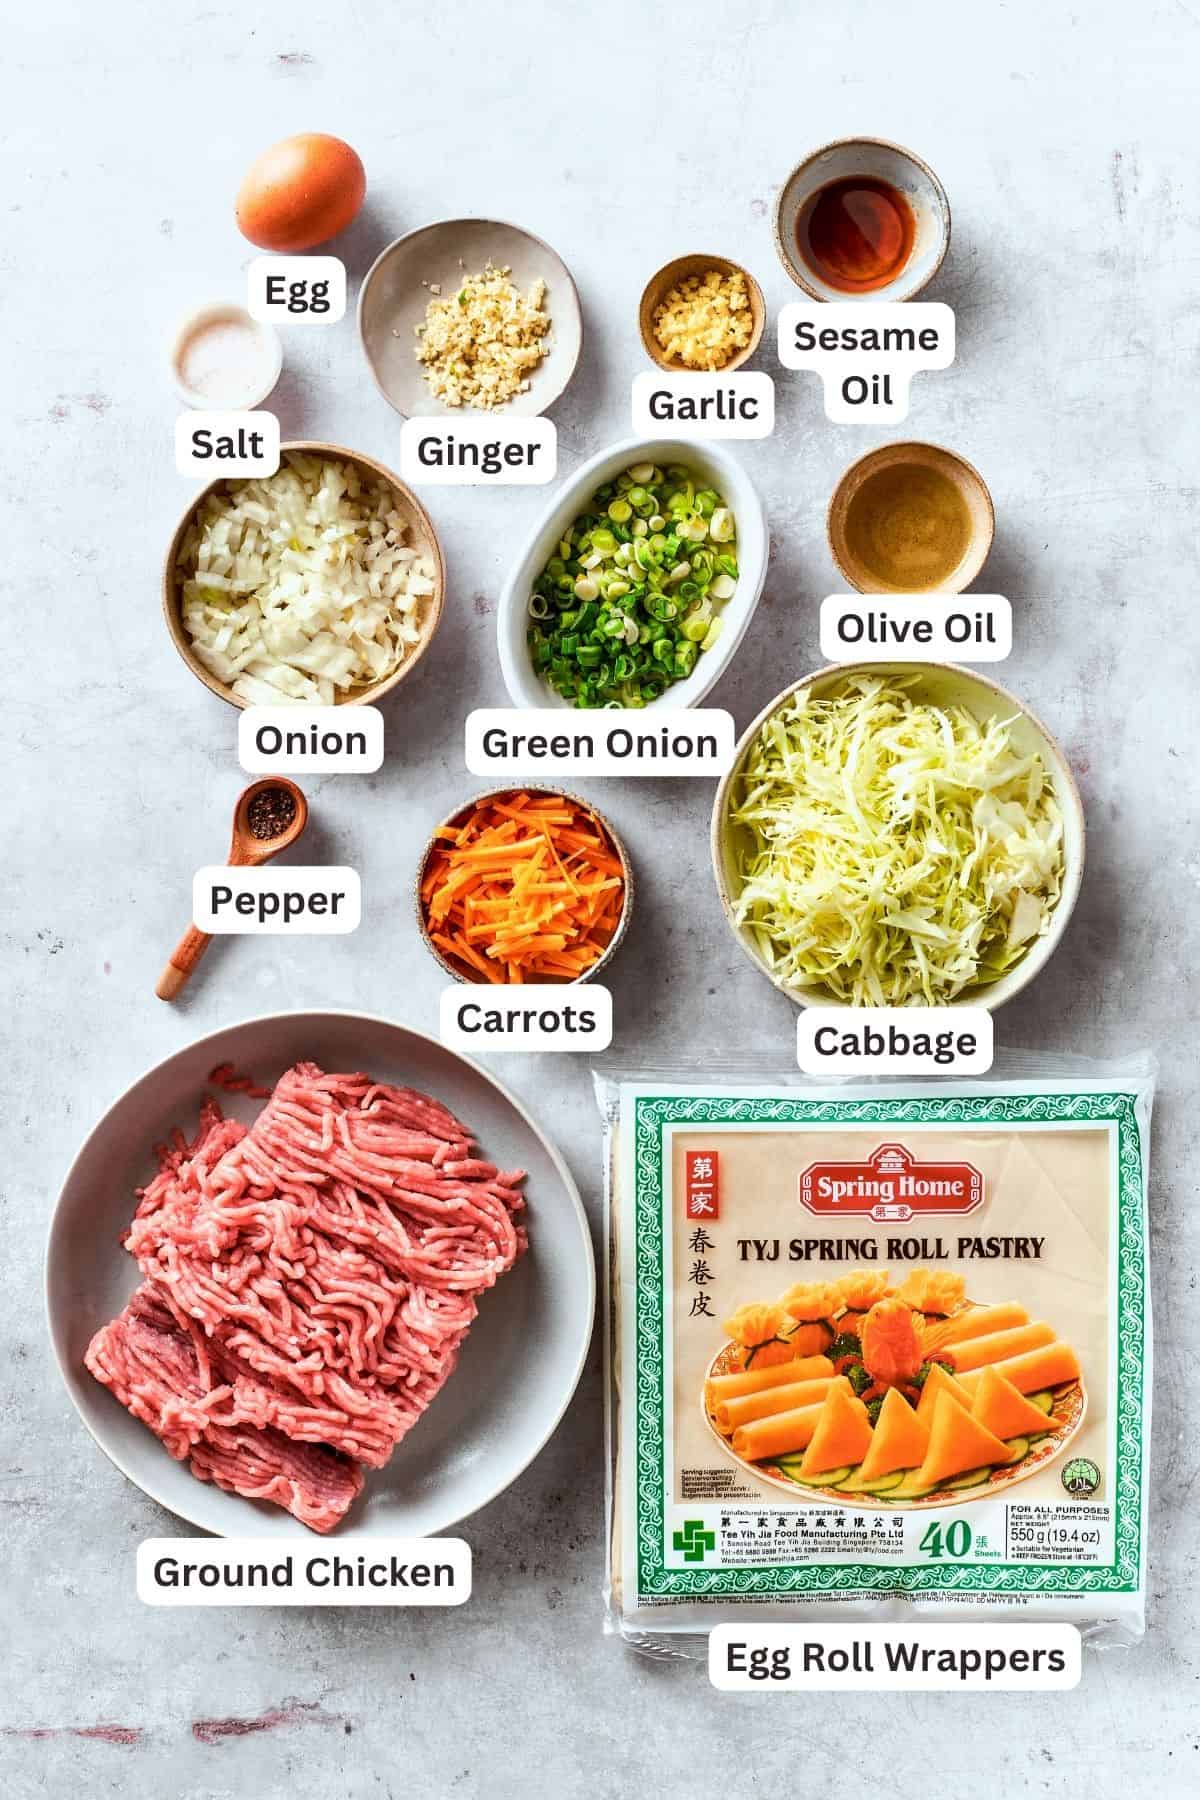 The ingredients for chicken egg rolls are shown portioned out and labelled: ground chicken, shredded carrots and cabbage, onion, garlic, olive oil ginger, sesame oil, garlic, green onions, egg roll wrappers, salt and pepper.